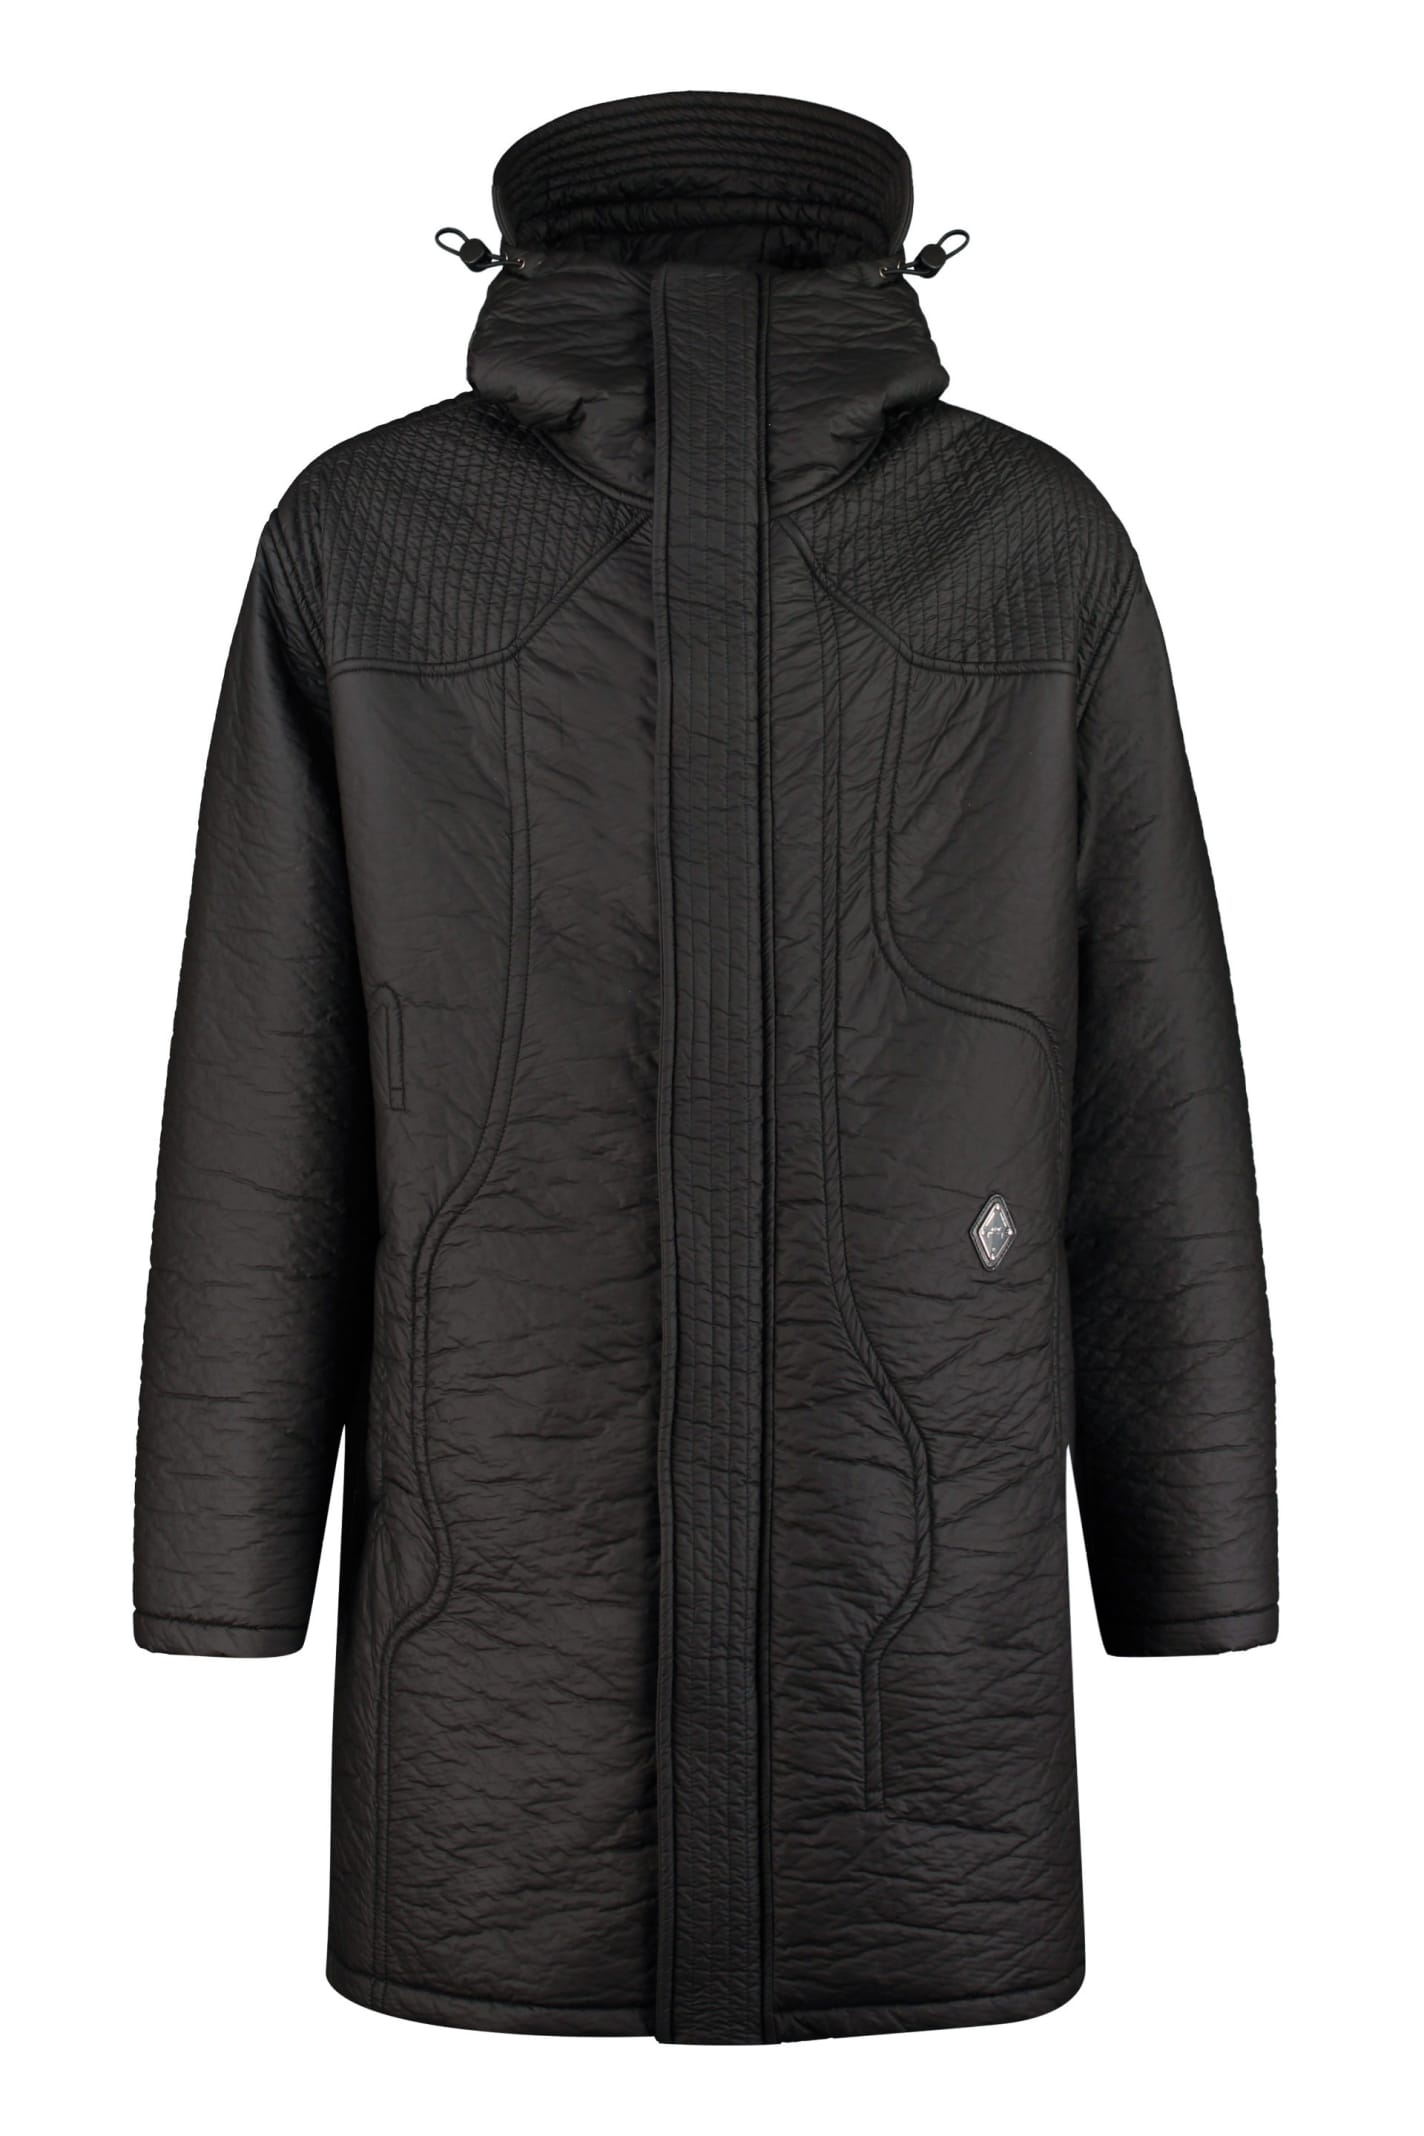 A-COLD-WALL Full Zip Padded Jacket